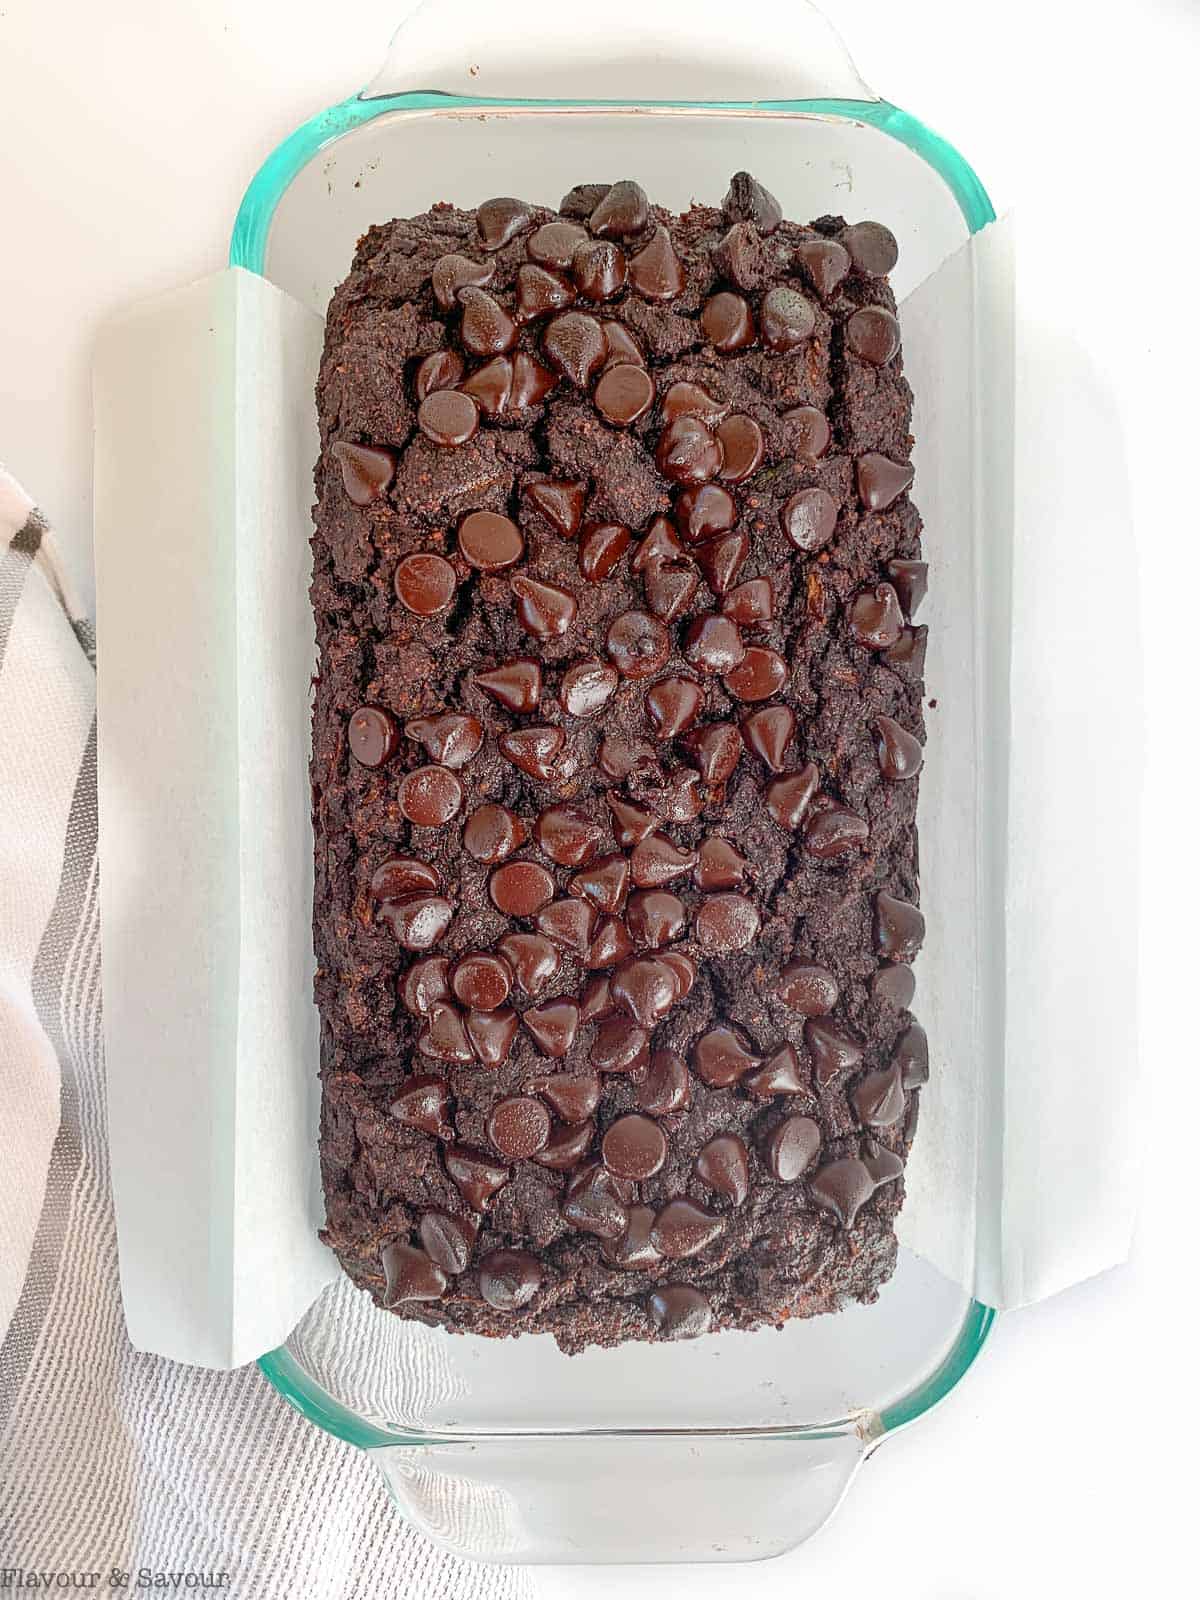 Double chocolate zucchini bread in a lined loaf pan